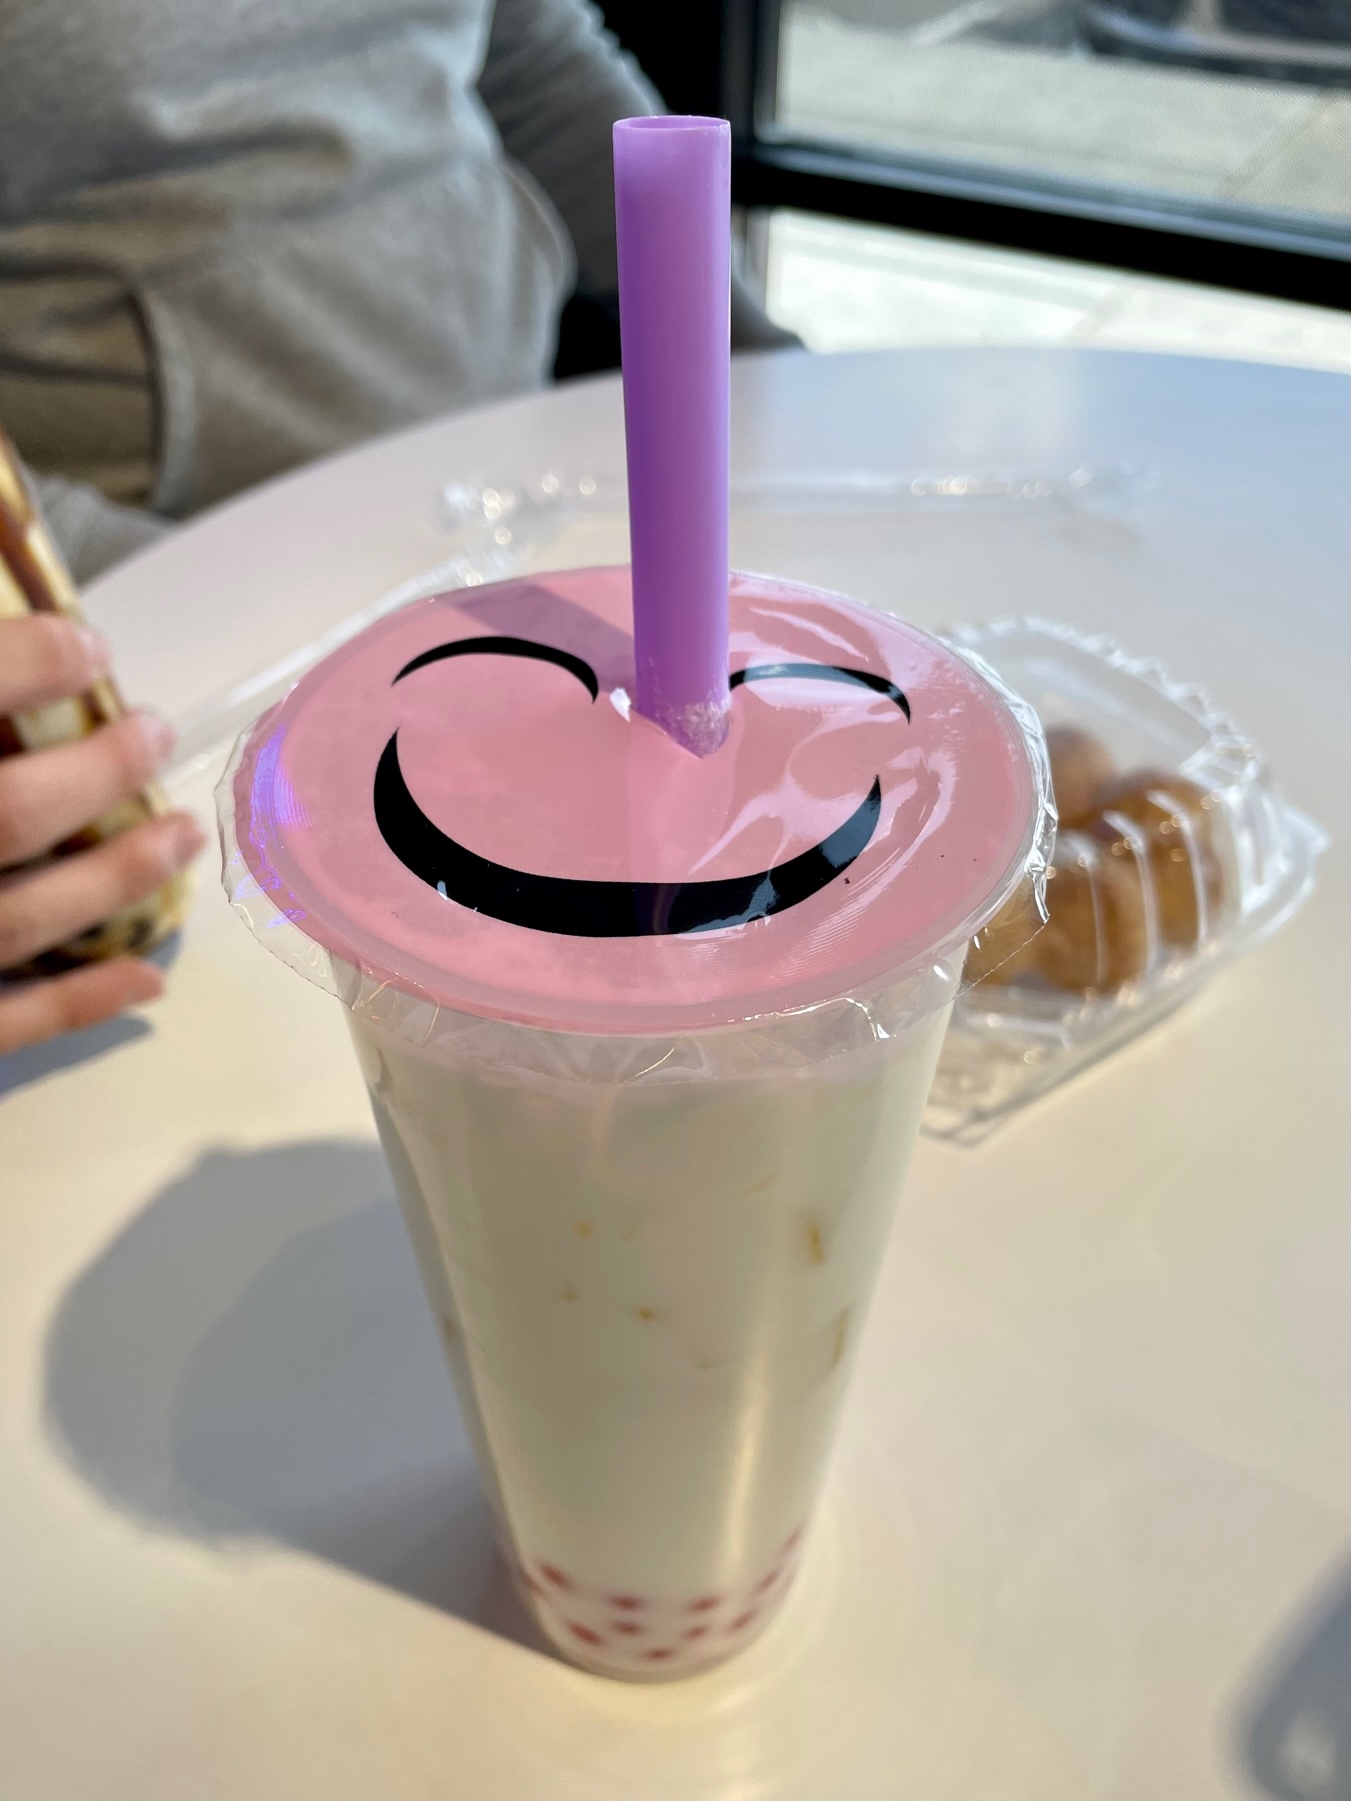 If you're a fan of boba, Mochilicious has got you covered there too